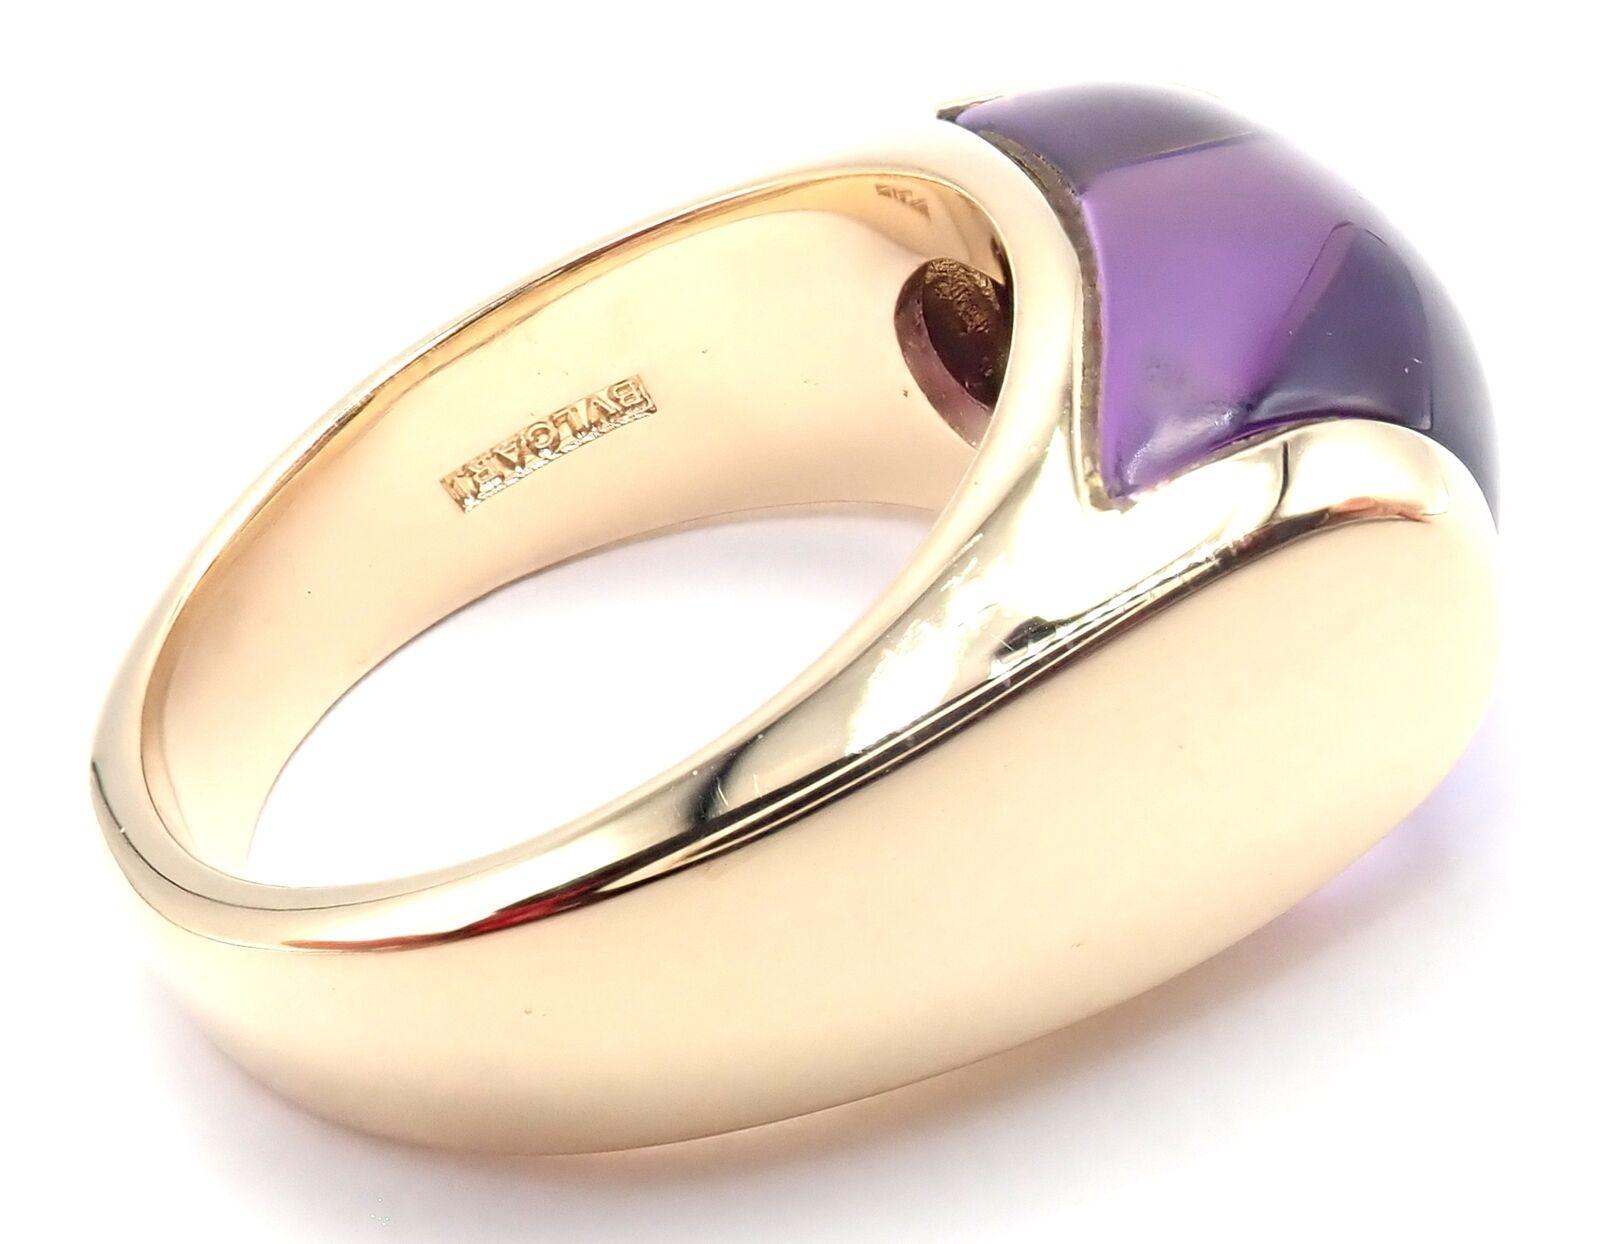 18k Yellow Gold Amethyst Tronchetto Band Ring by Bulgari.
With 1x Coral 9mm x 13mm in size
Ring Size: 5
Weight: 9.3 grams
Hallmarks: Bulgari 750 Made in Italy
*Free Shipping within the United States*
YOUR PRICE: $2,900
T3343mdhd